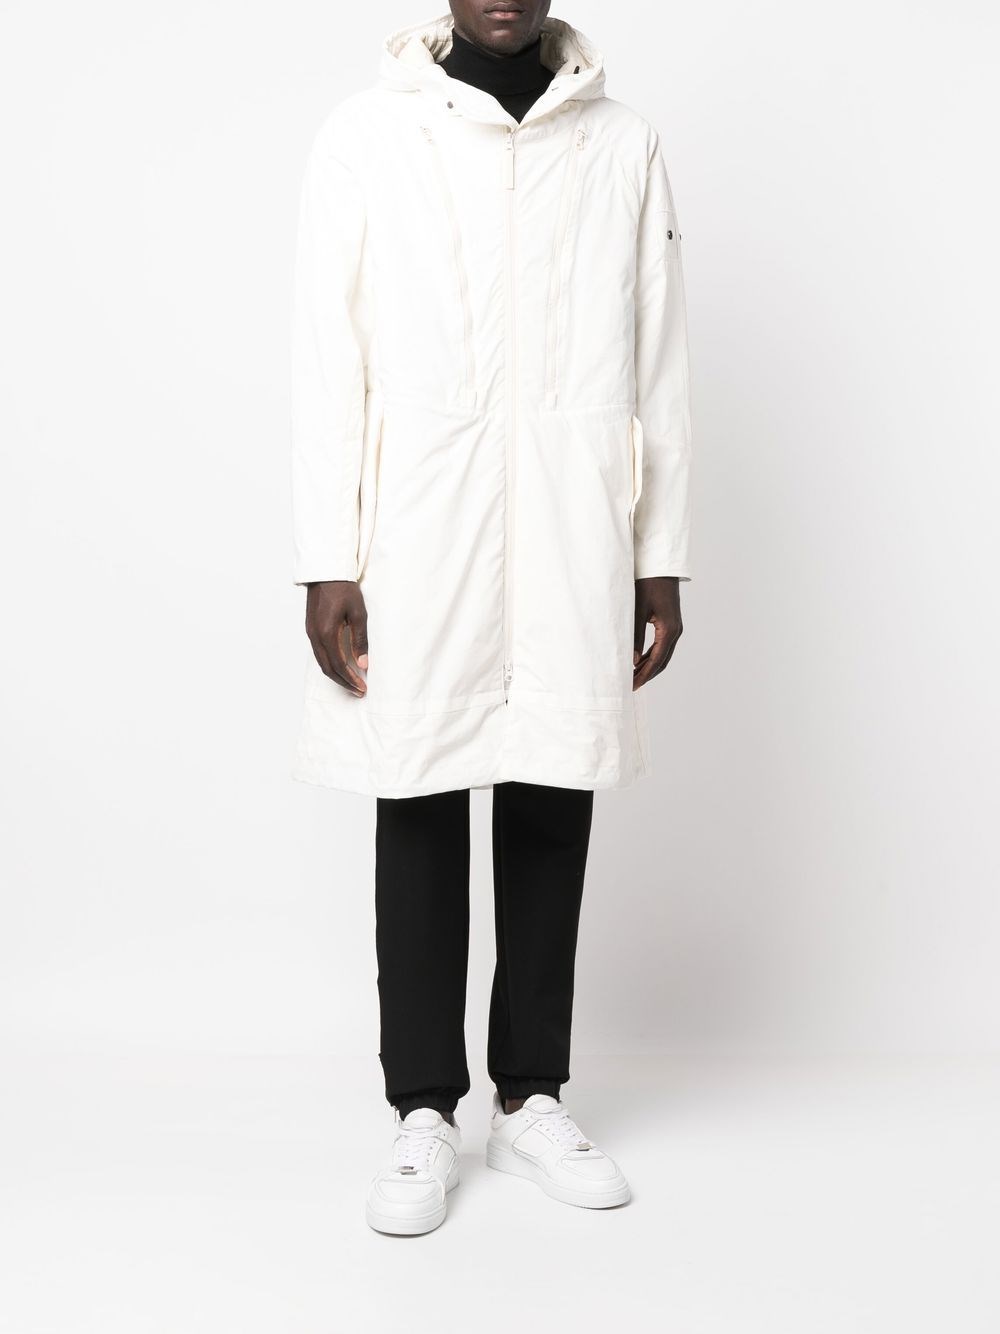 stone island shadow project `chapter 2 fishtail` parka available